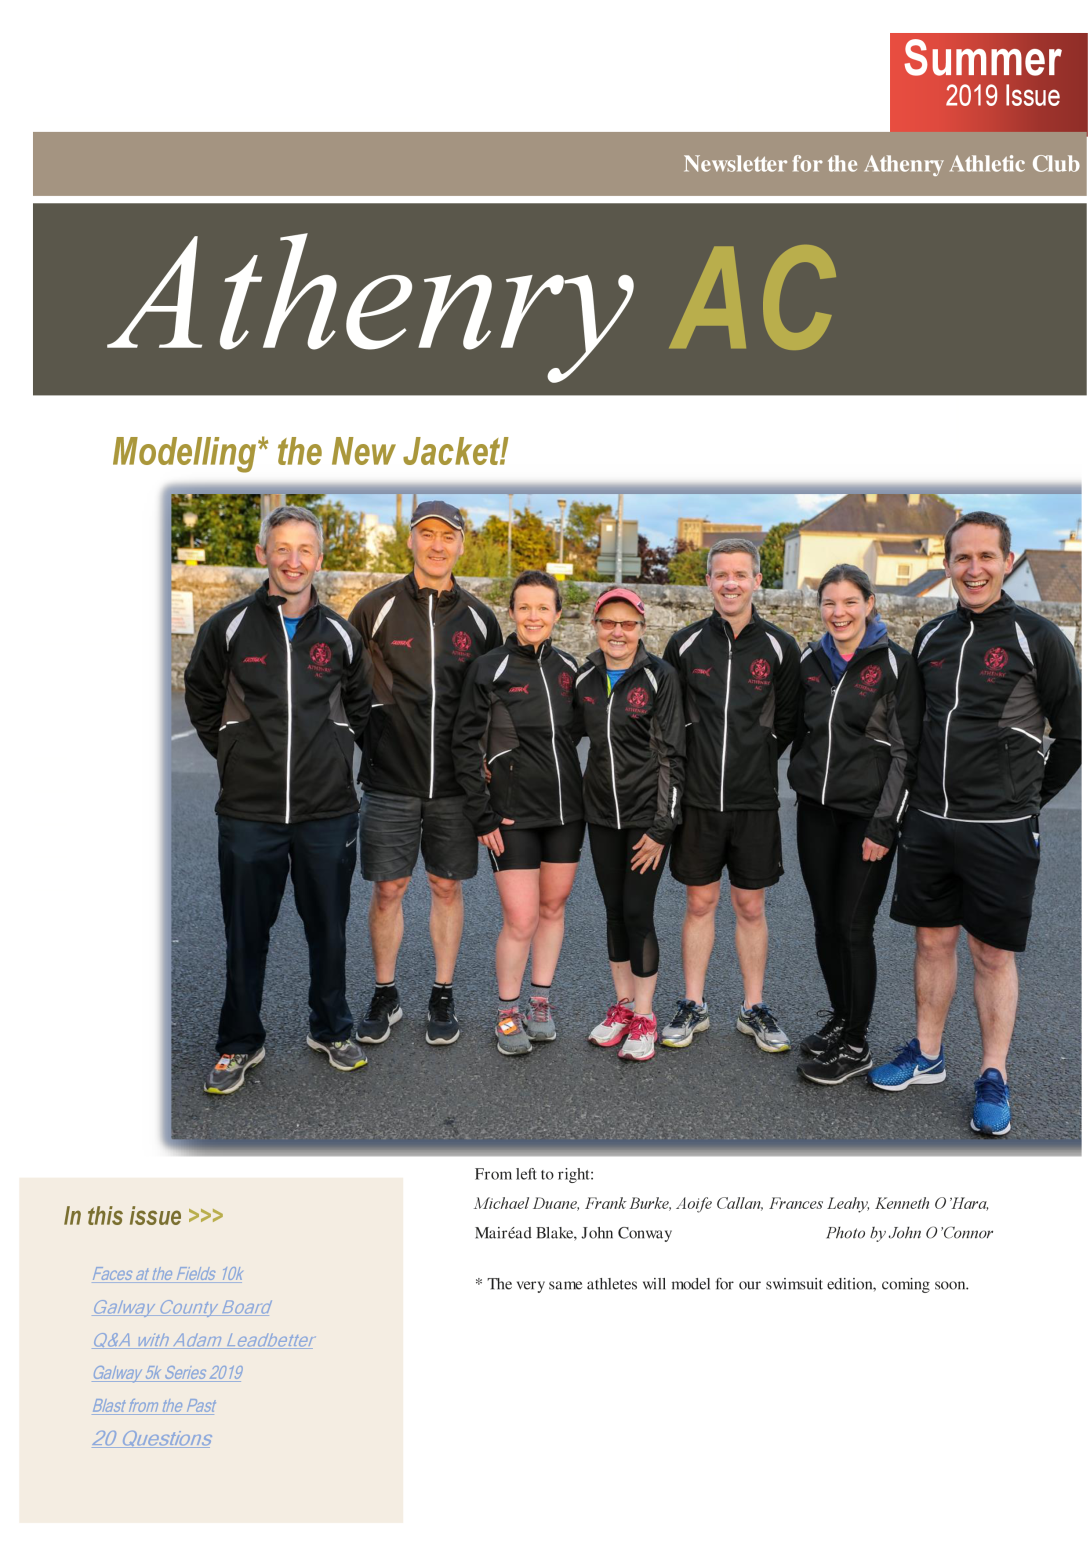 Initial page showing a group with a new Athenry top.